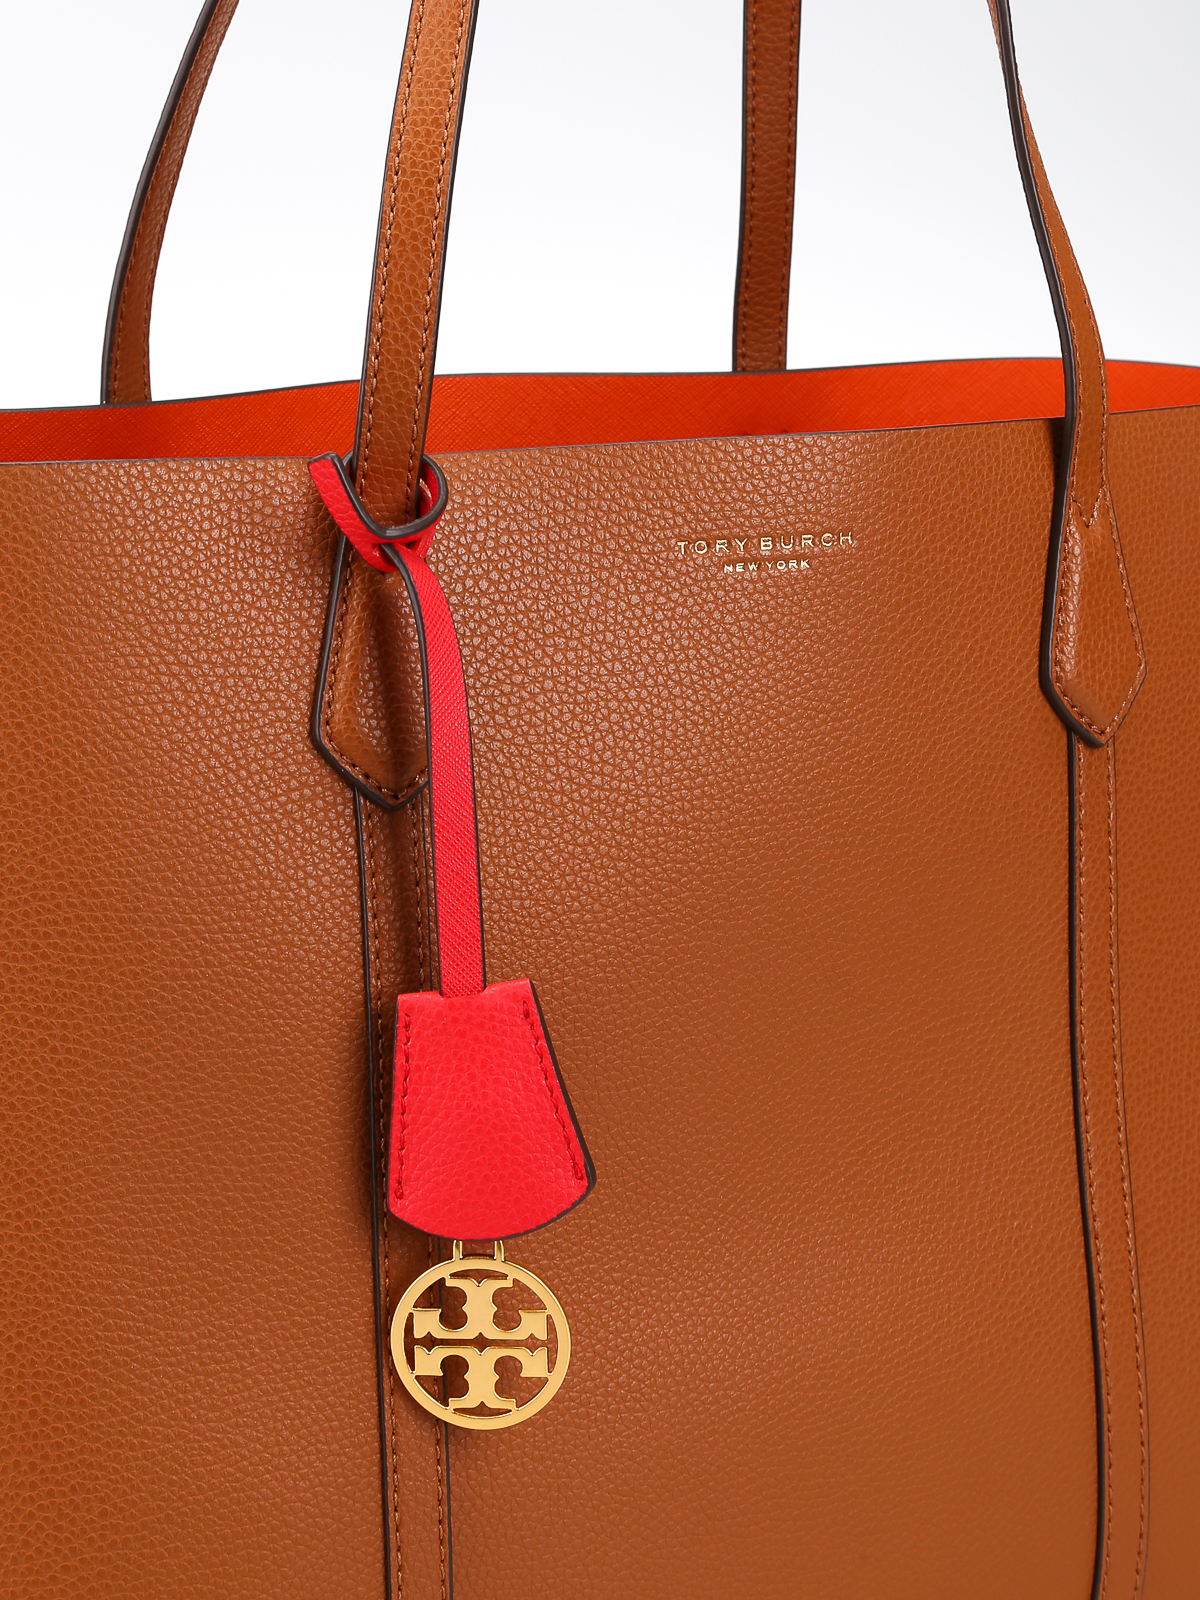 Tory Burch Brown Leather Small Triple Compartment Perry Tote Tory